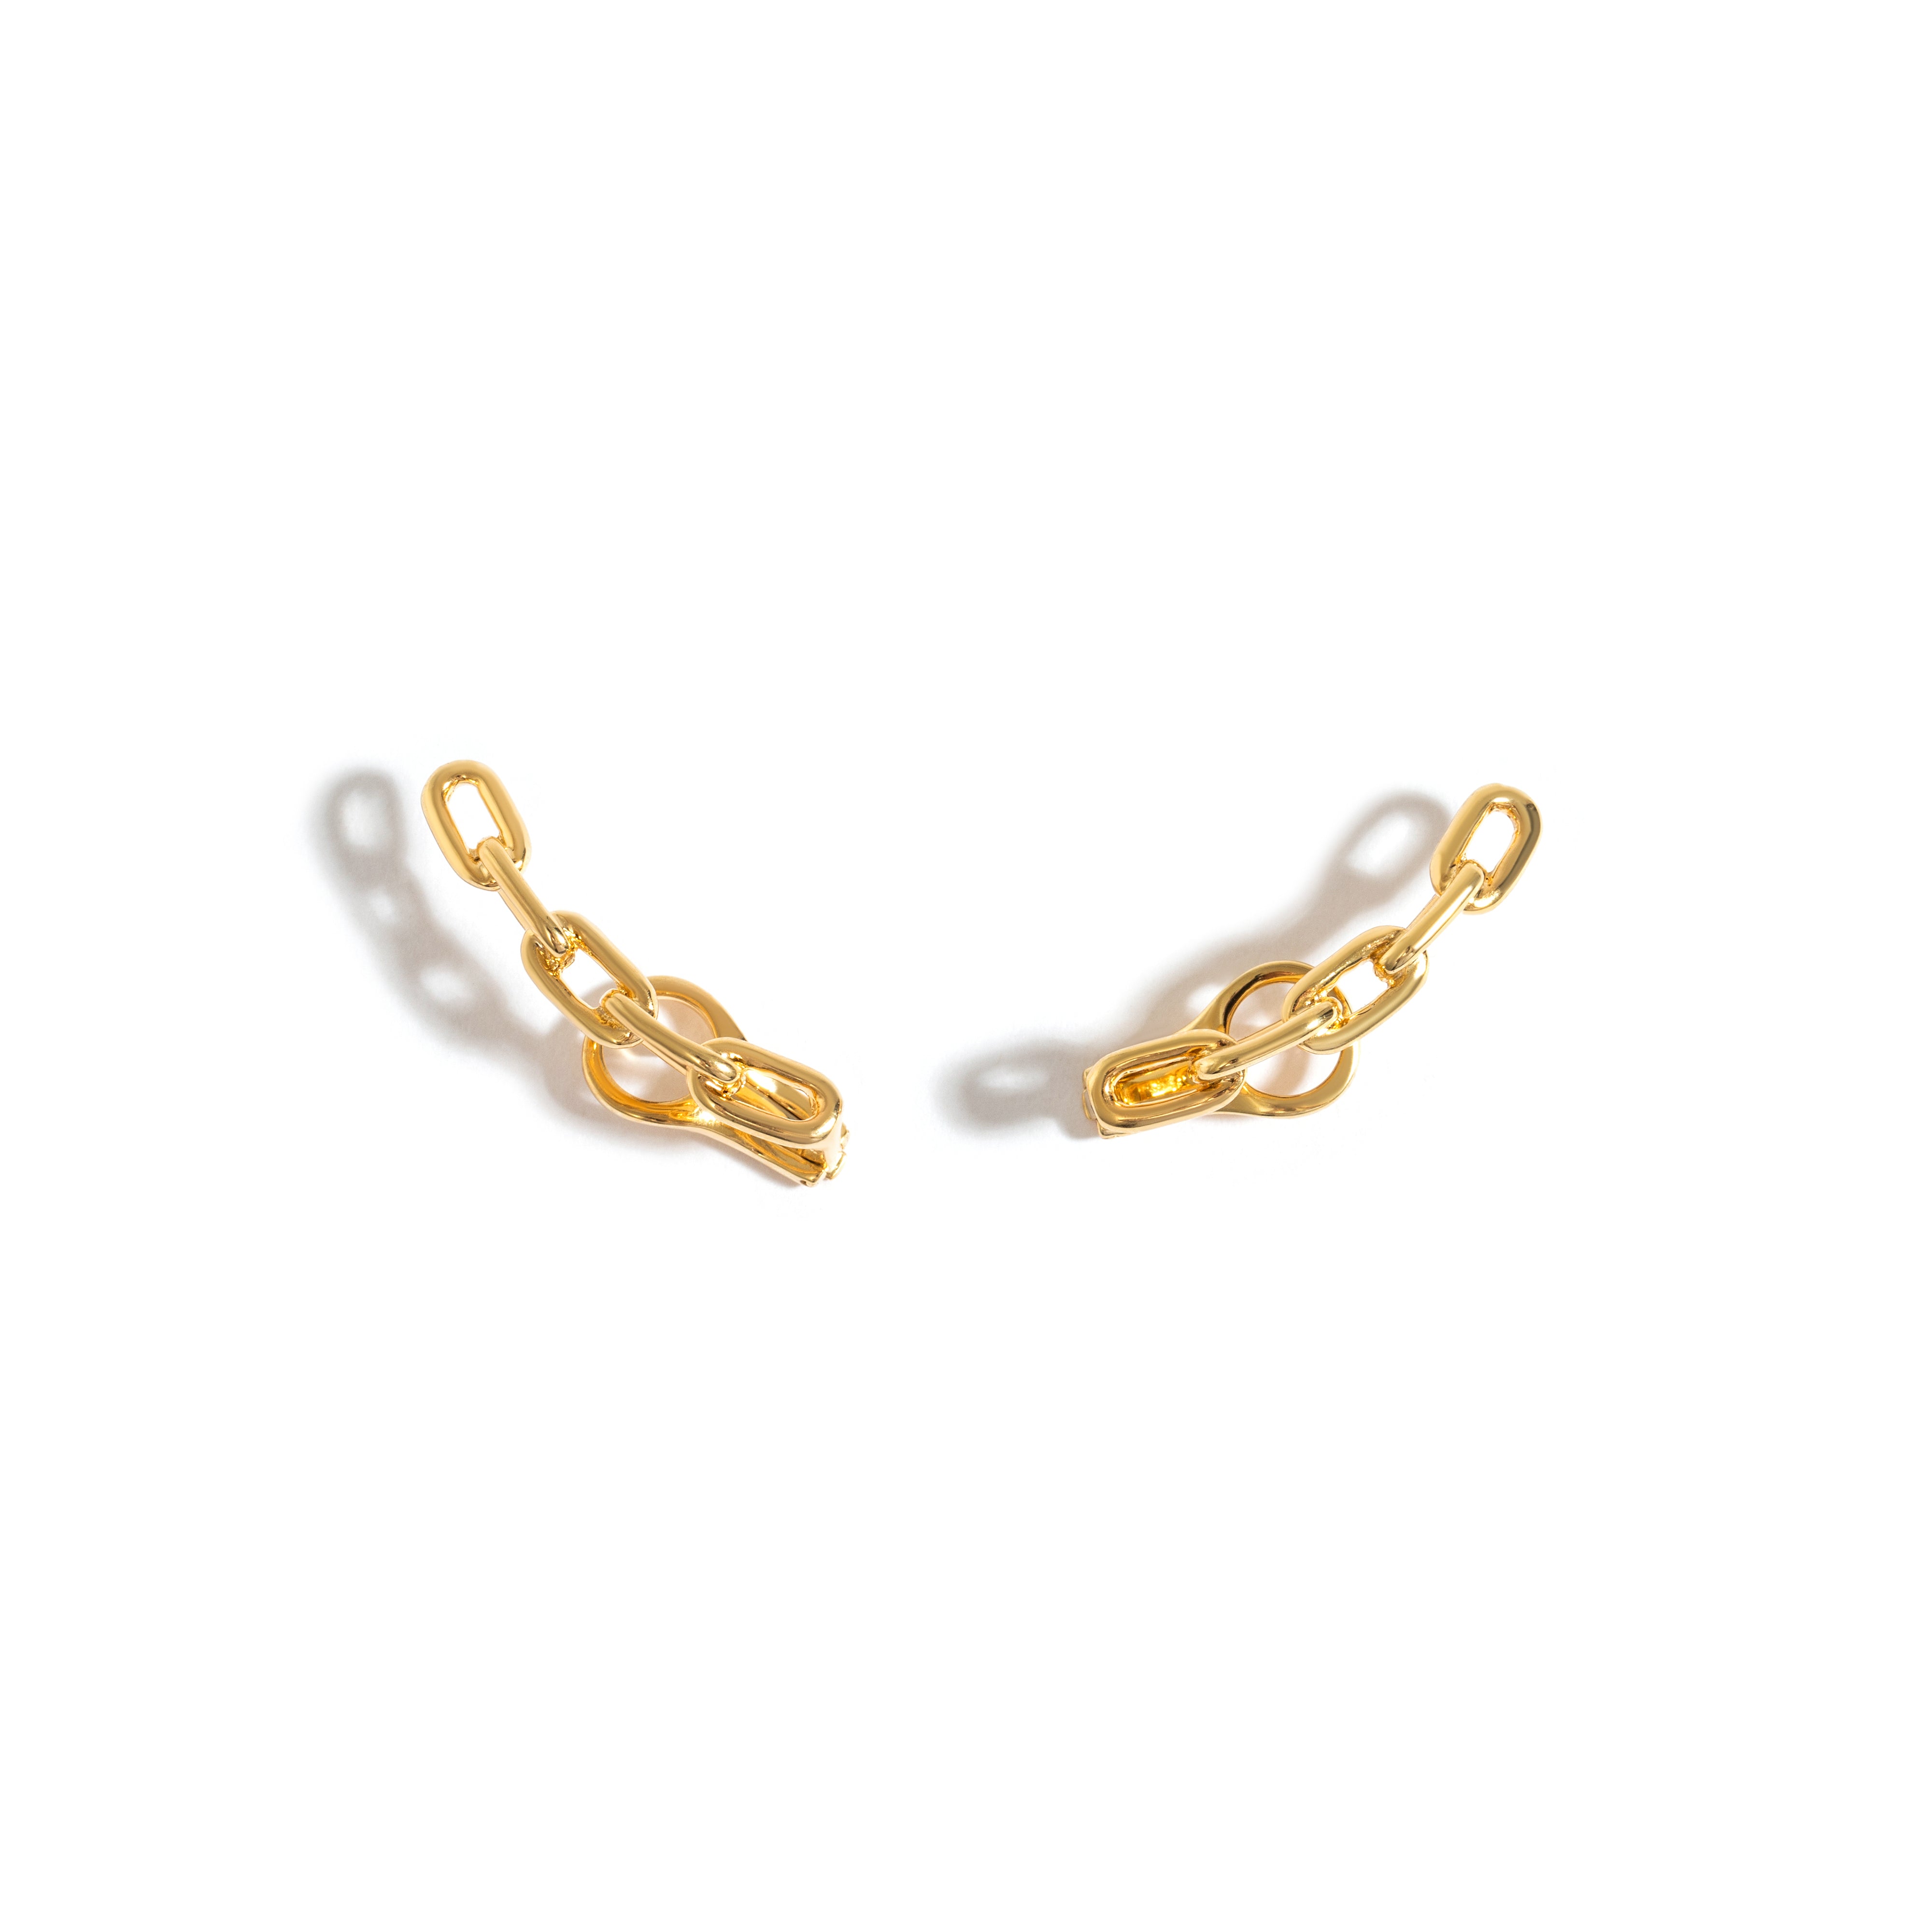 CHAIN COMET EARRING IN 18K YELLOW GOLD PLATED SILVER